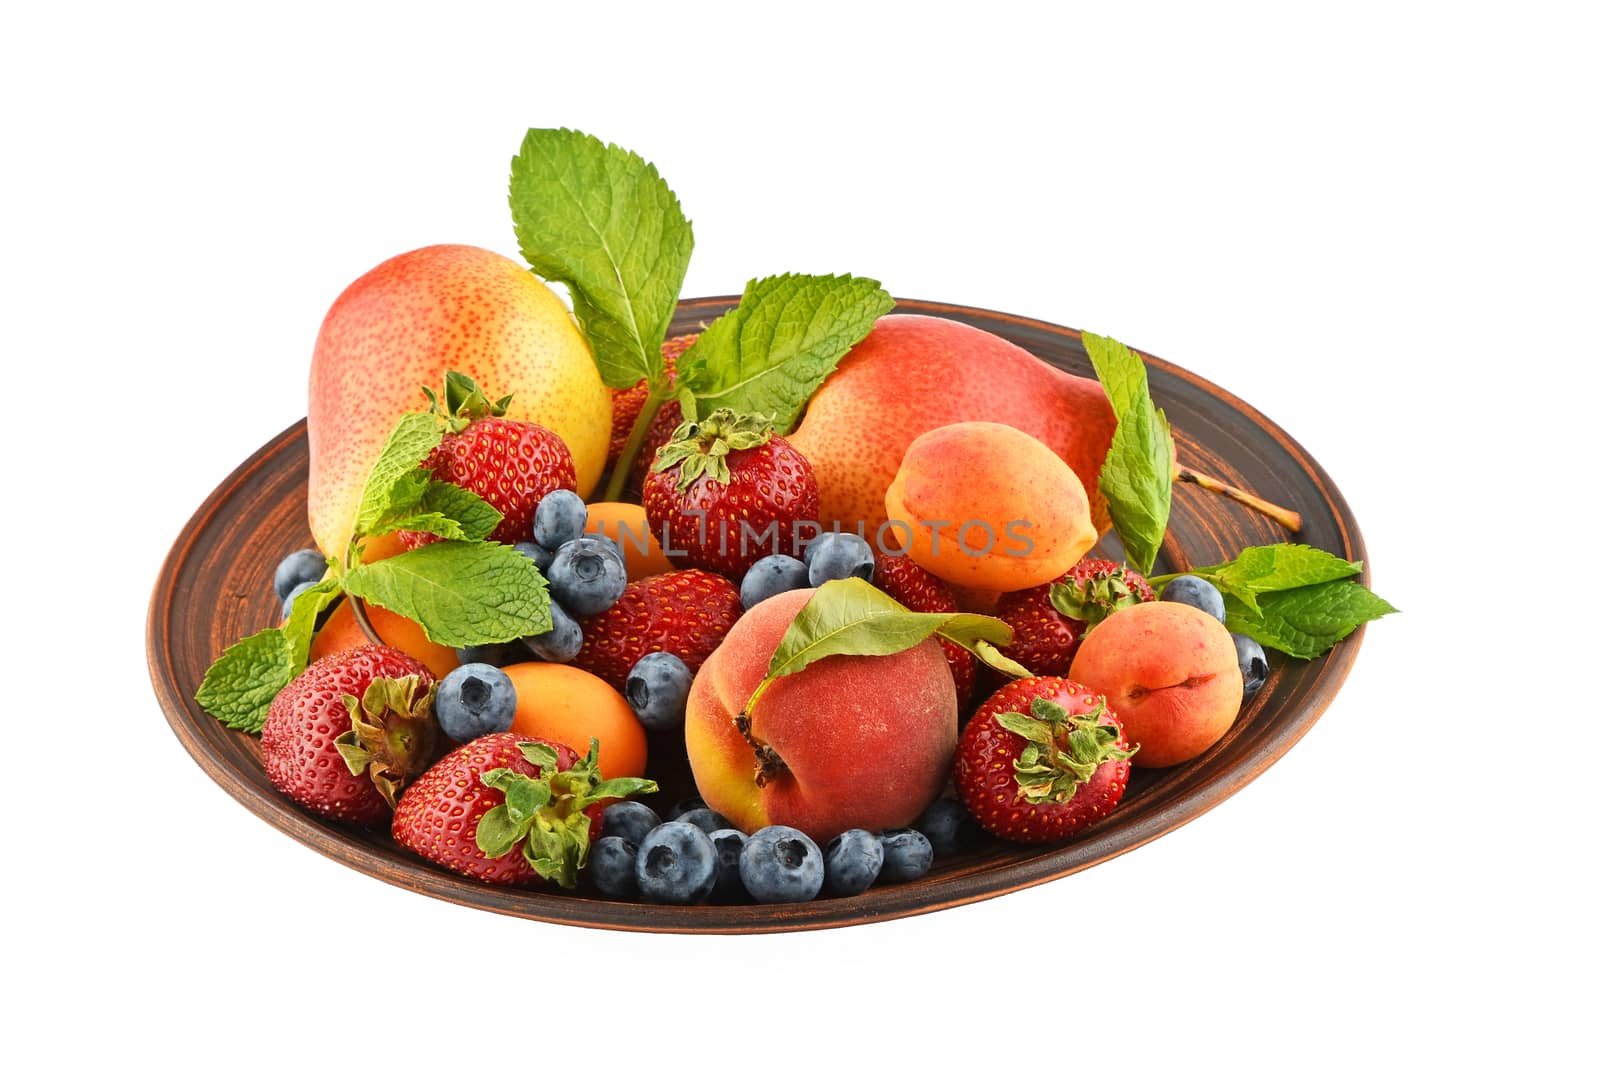 Fruits and berries mix in ceramic plate isolated on white by BreakingTheWalls